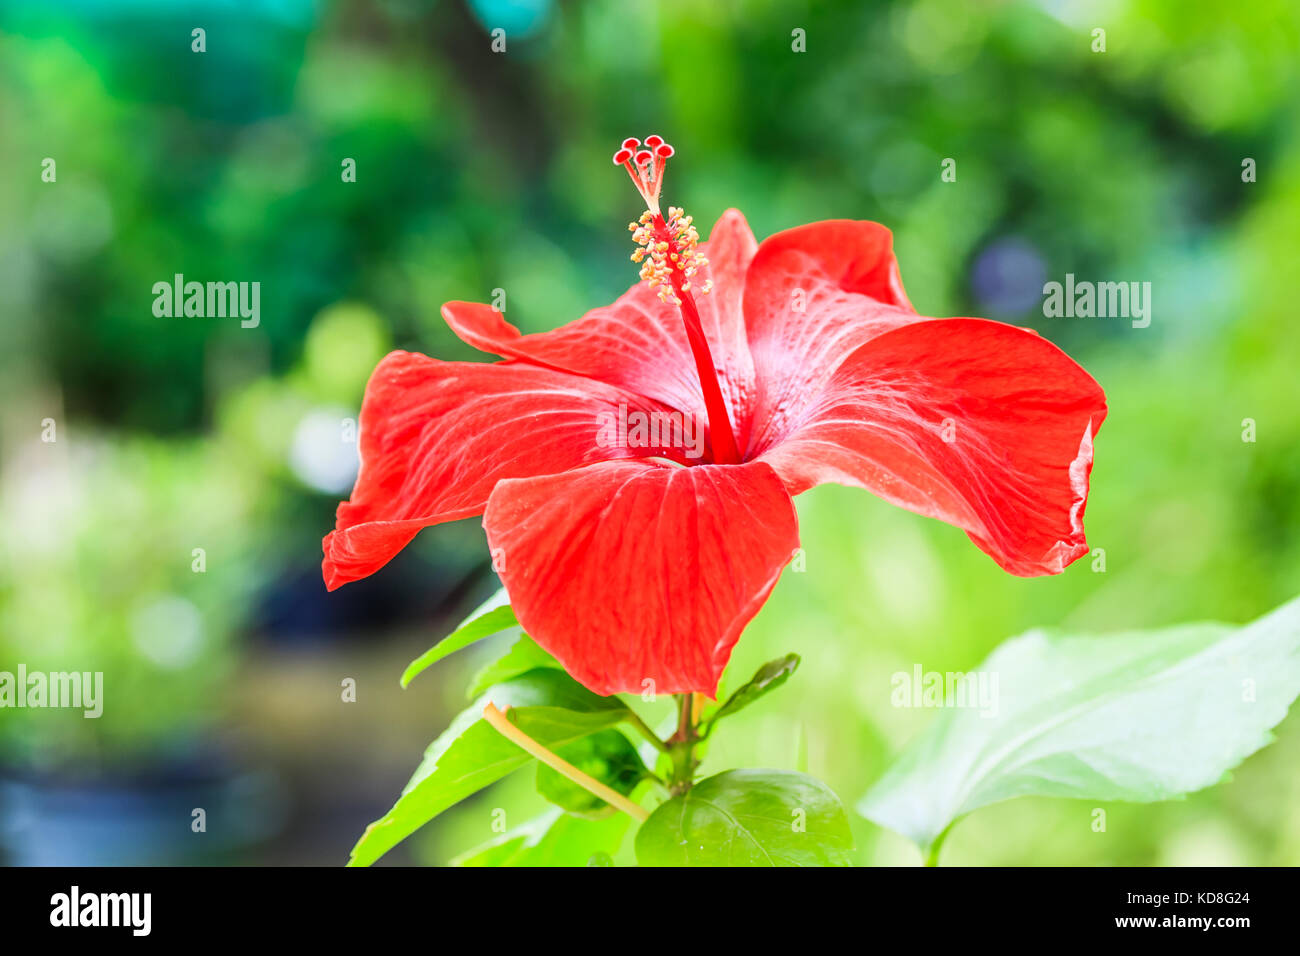 The brilliant red flower of an hibiscus glowing in the sun. Stock Photo